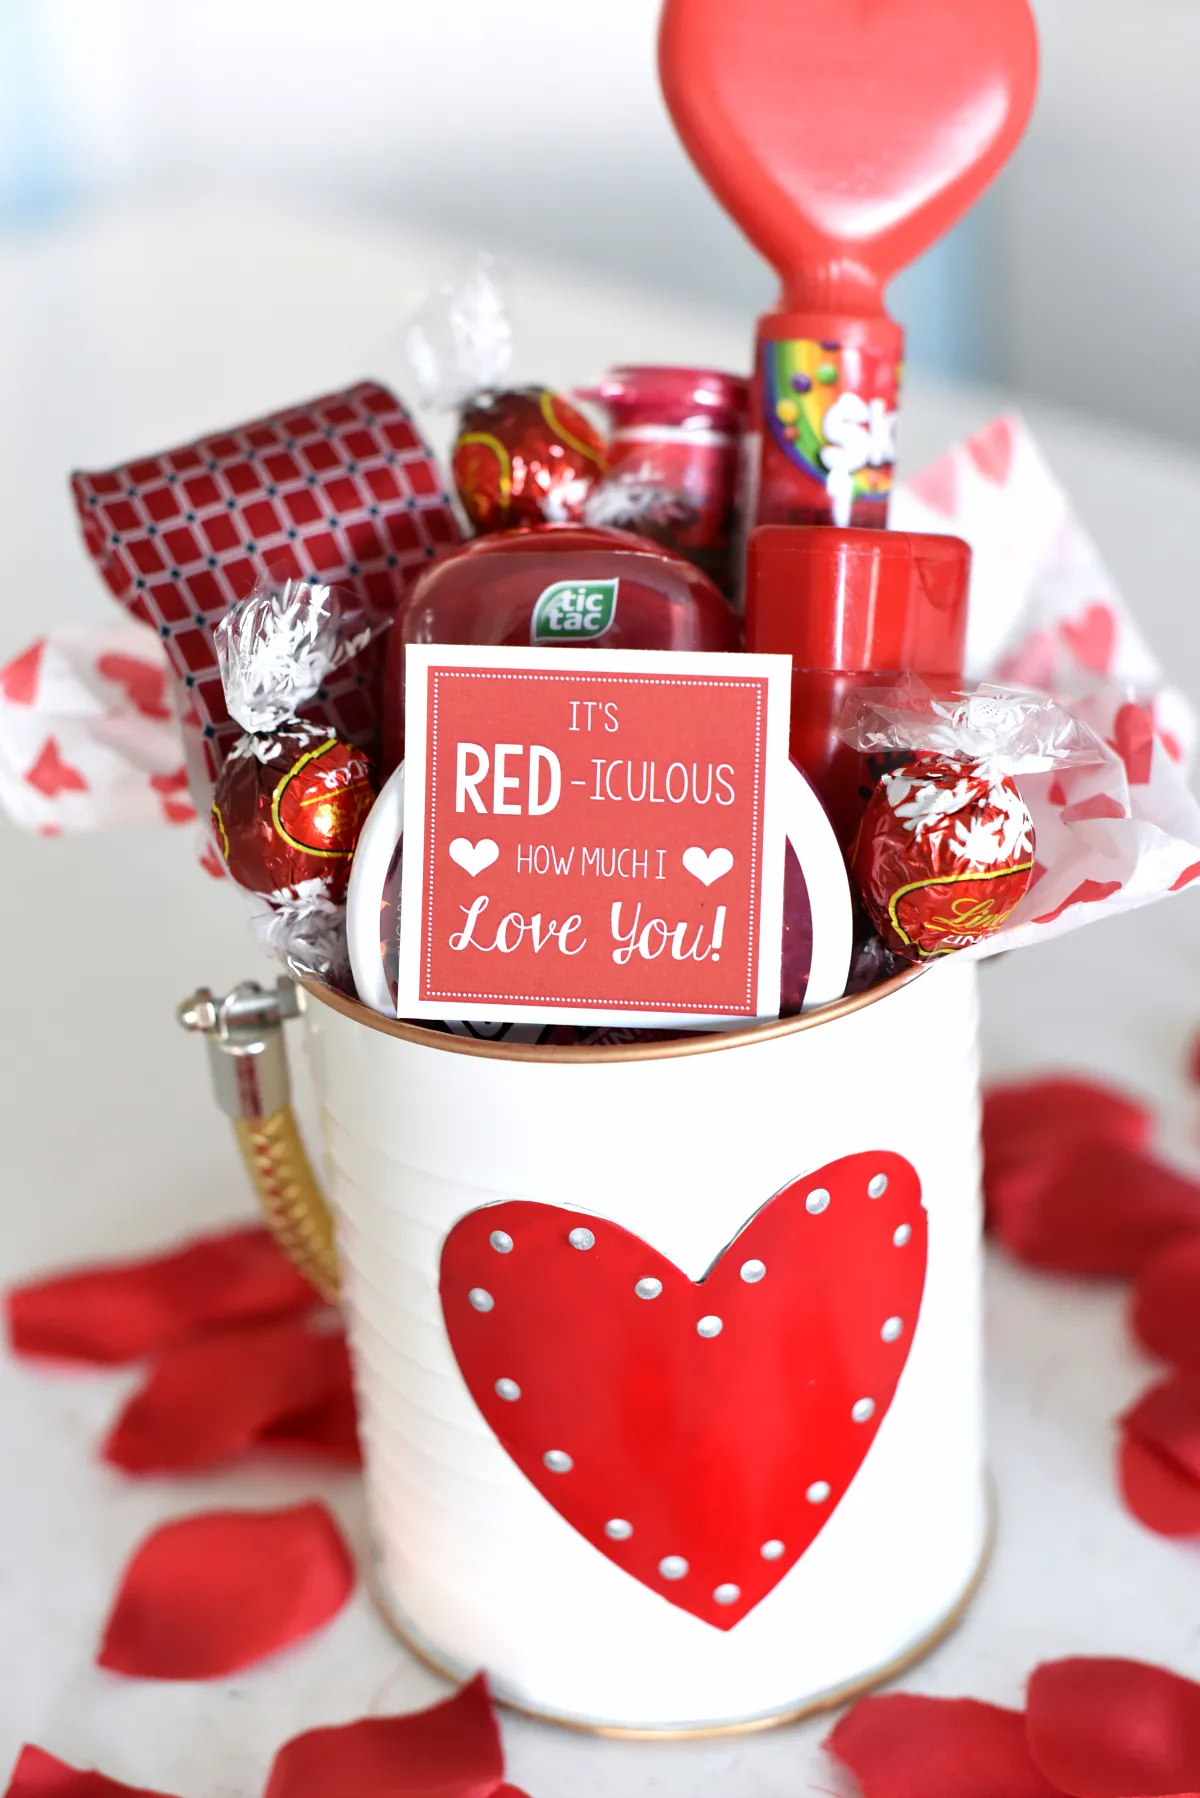 U UQUI Rose Bear Valentines Day Gifts for Her, India | Ubuy